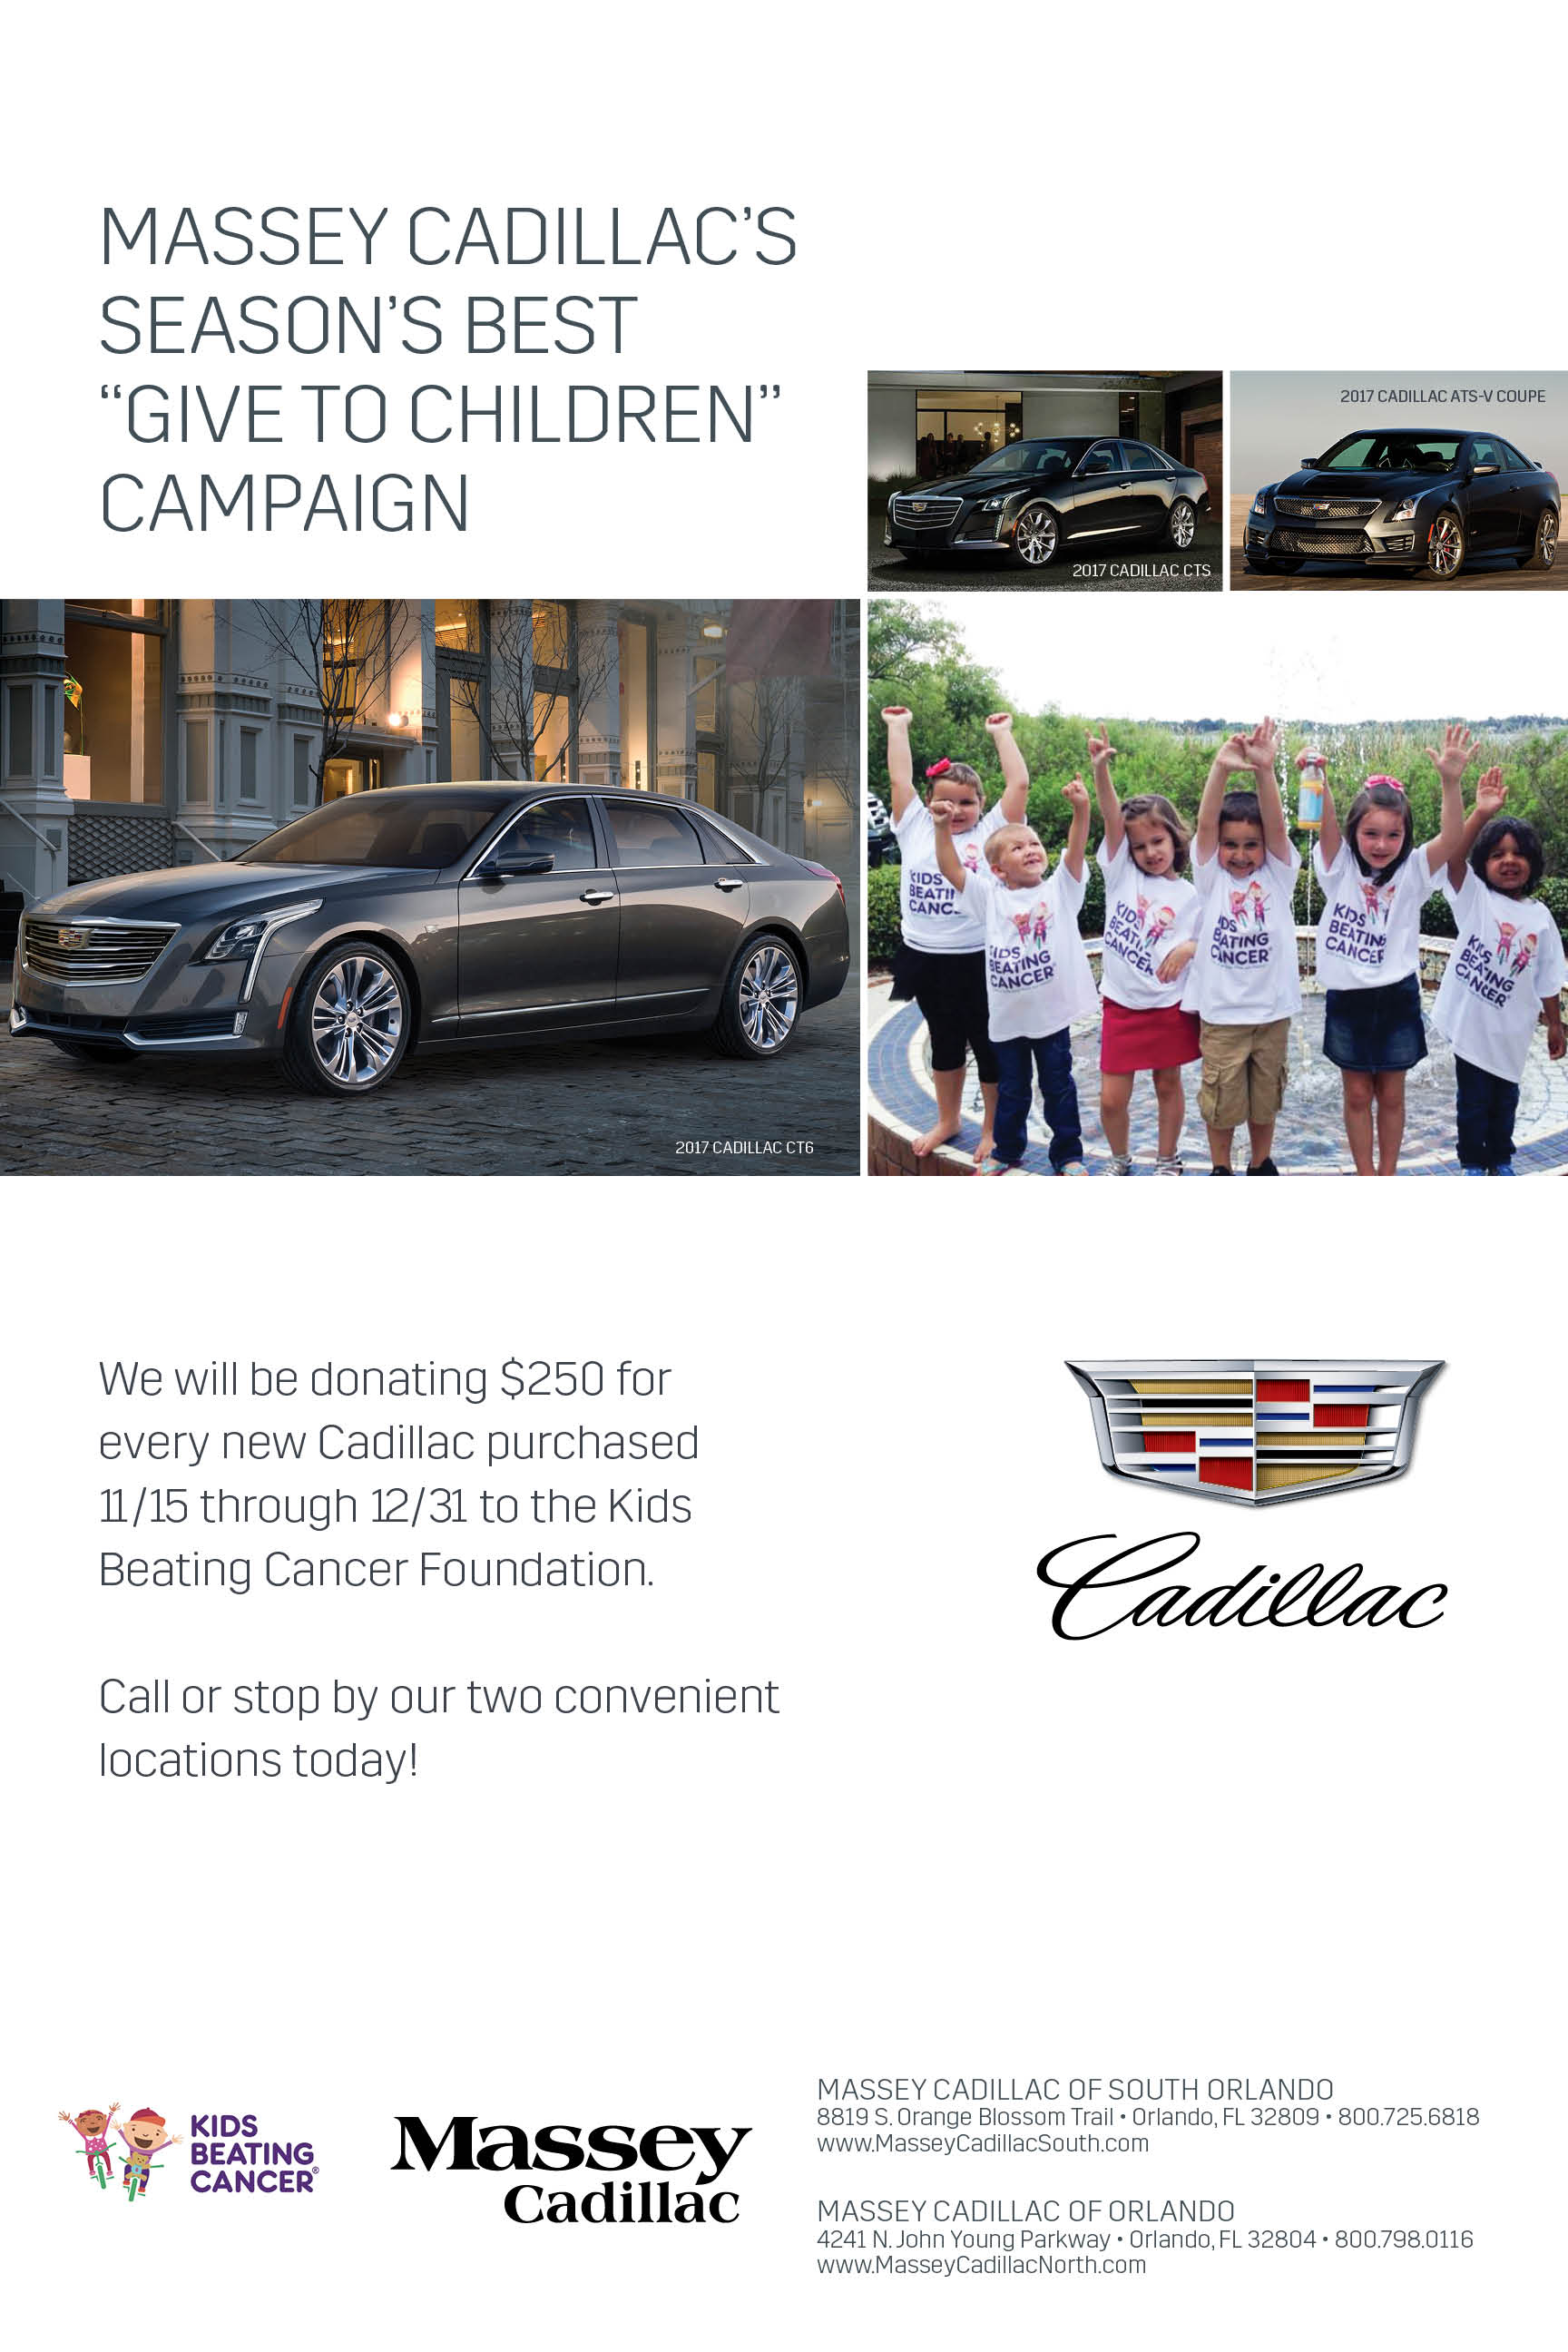 seasons-best-campaign-for-kids-beating-cancer